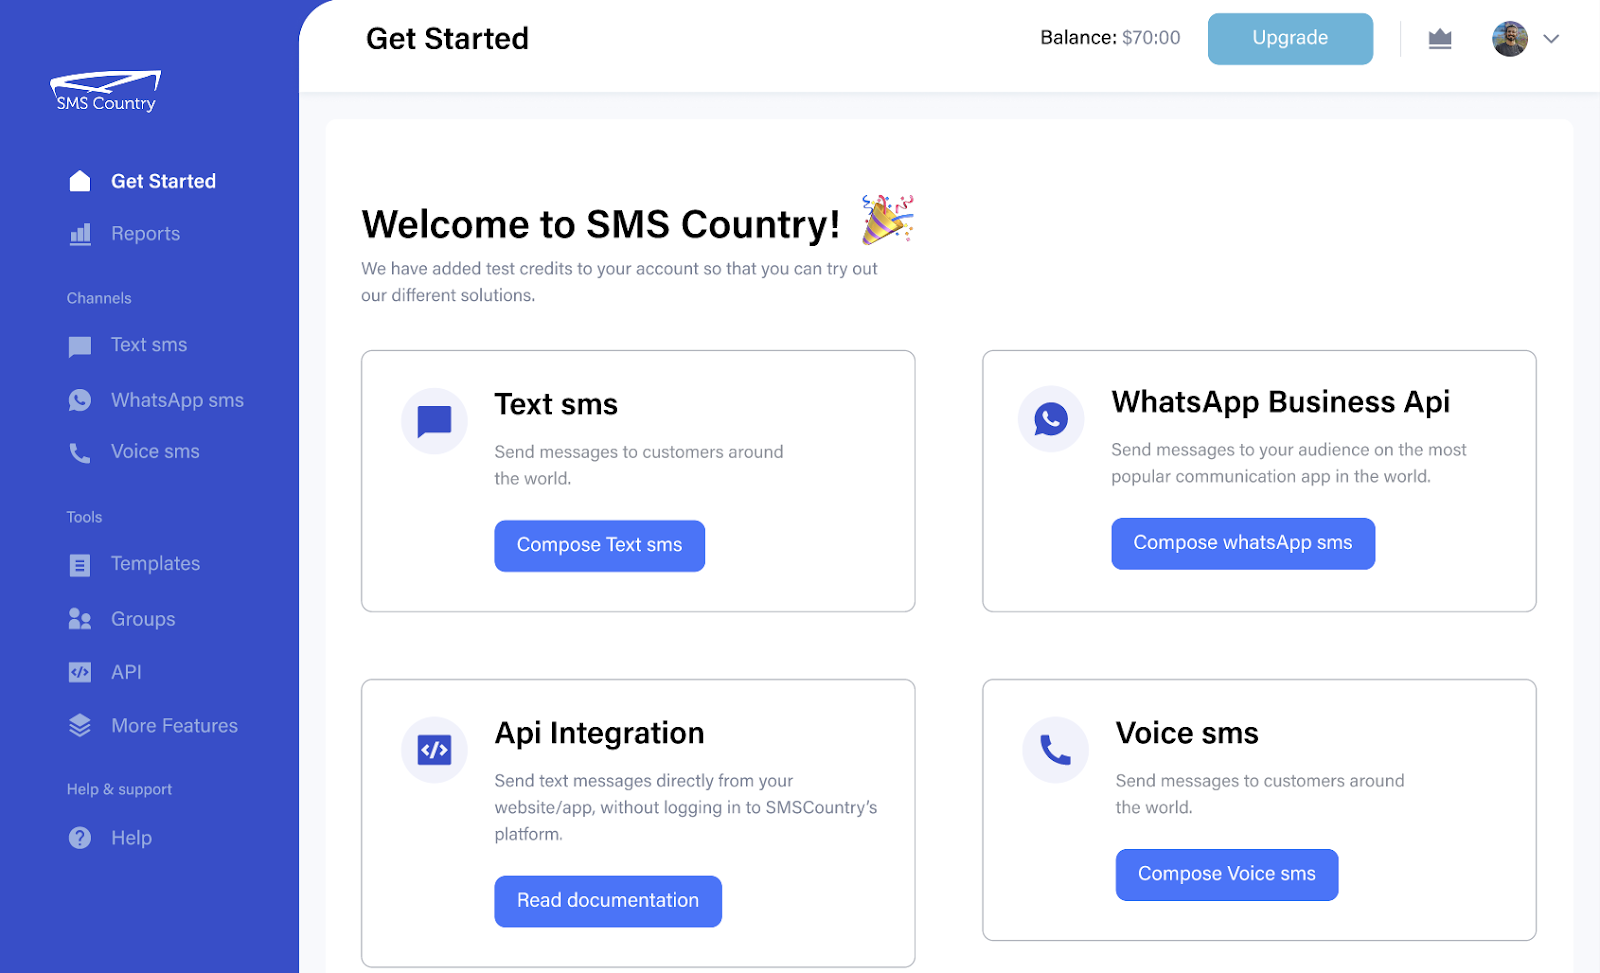 Best 6 Bulk SMS Service Providers In India | A webpage showing SMSCountry's various communication channels